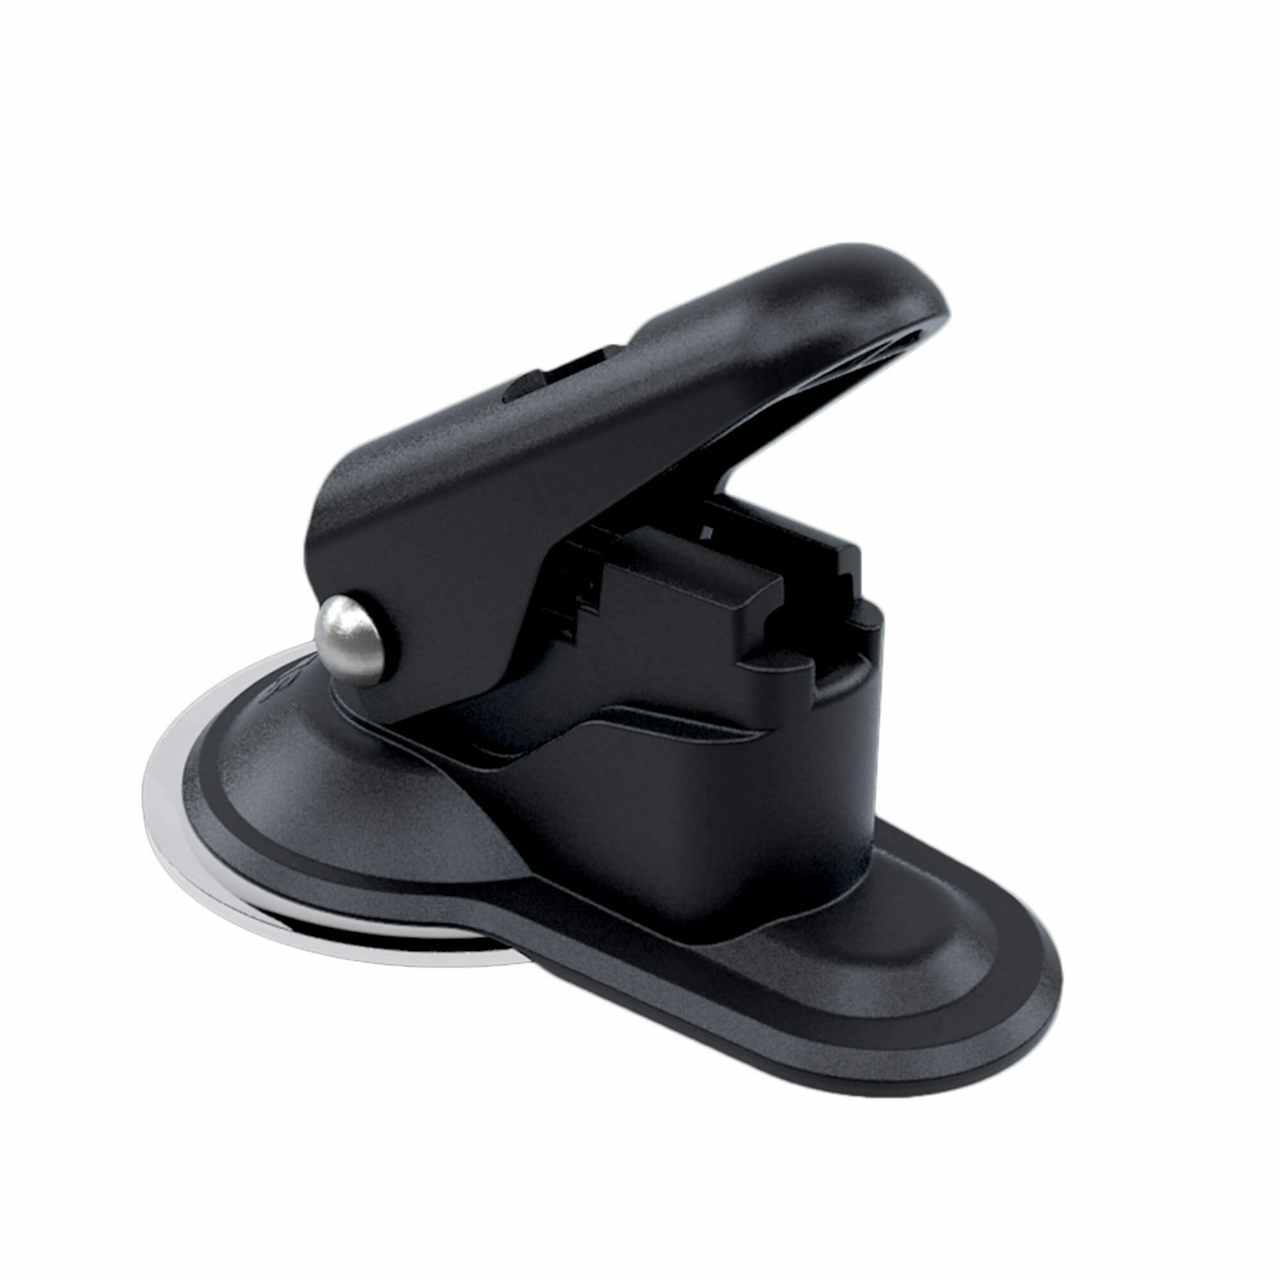 Skipper Suction Pad Holder/Receiver